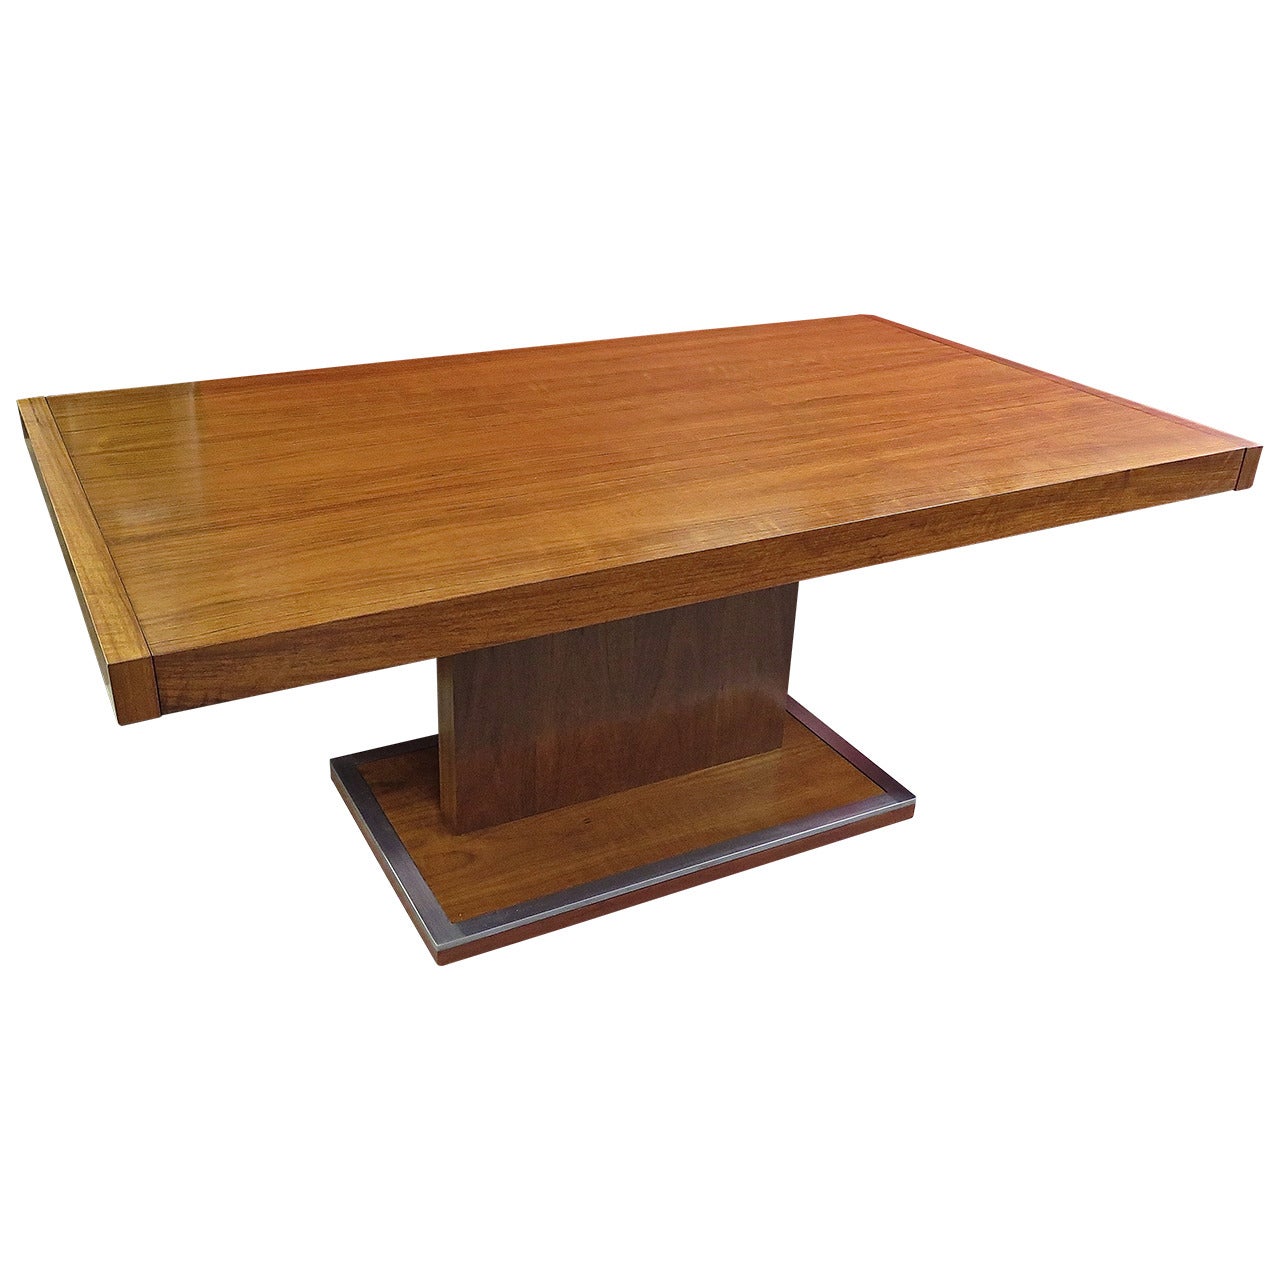 Gorgeous 1950 Pedestal Center Table Attributed to Baughman